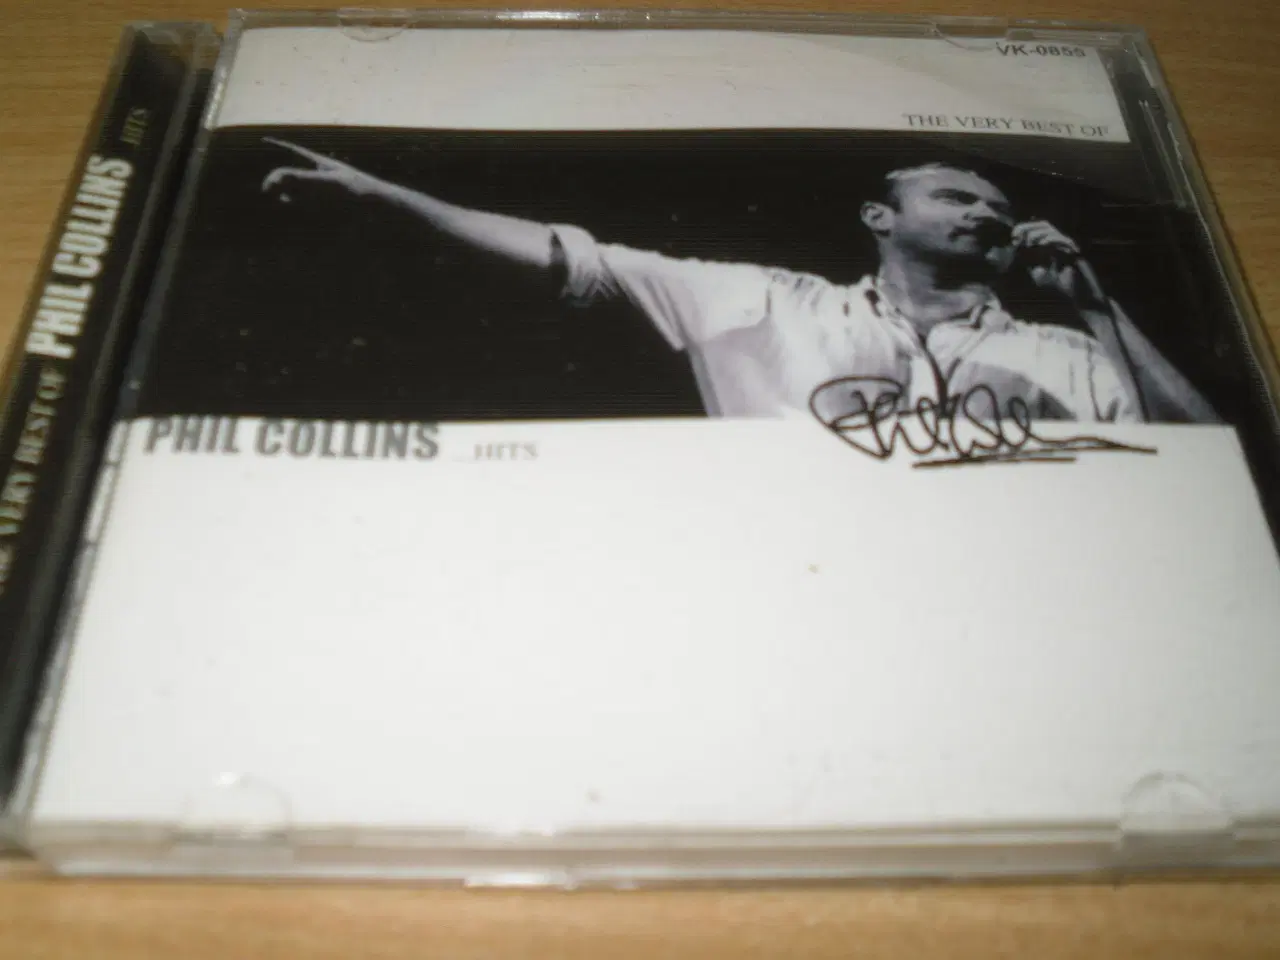 Billede 1 - The very best of PHIL COLLINS Hits.